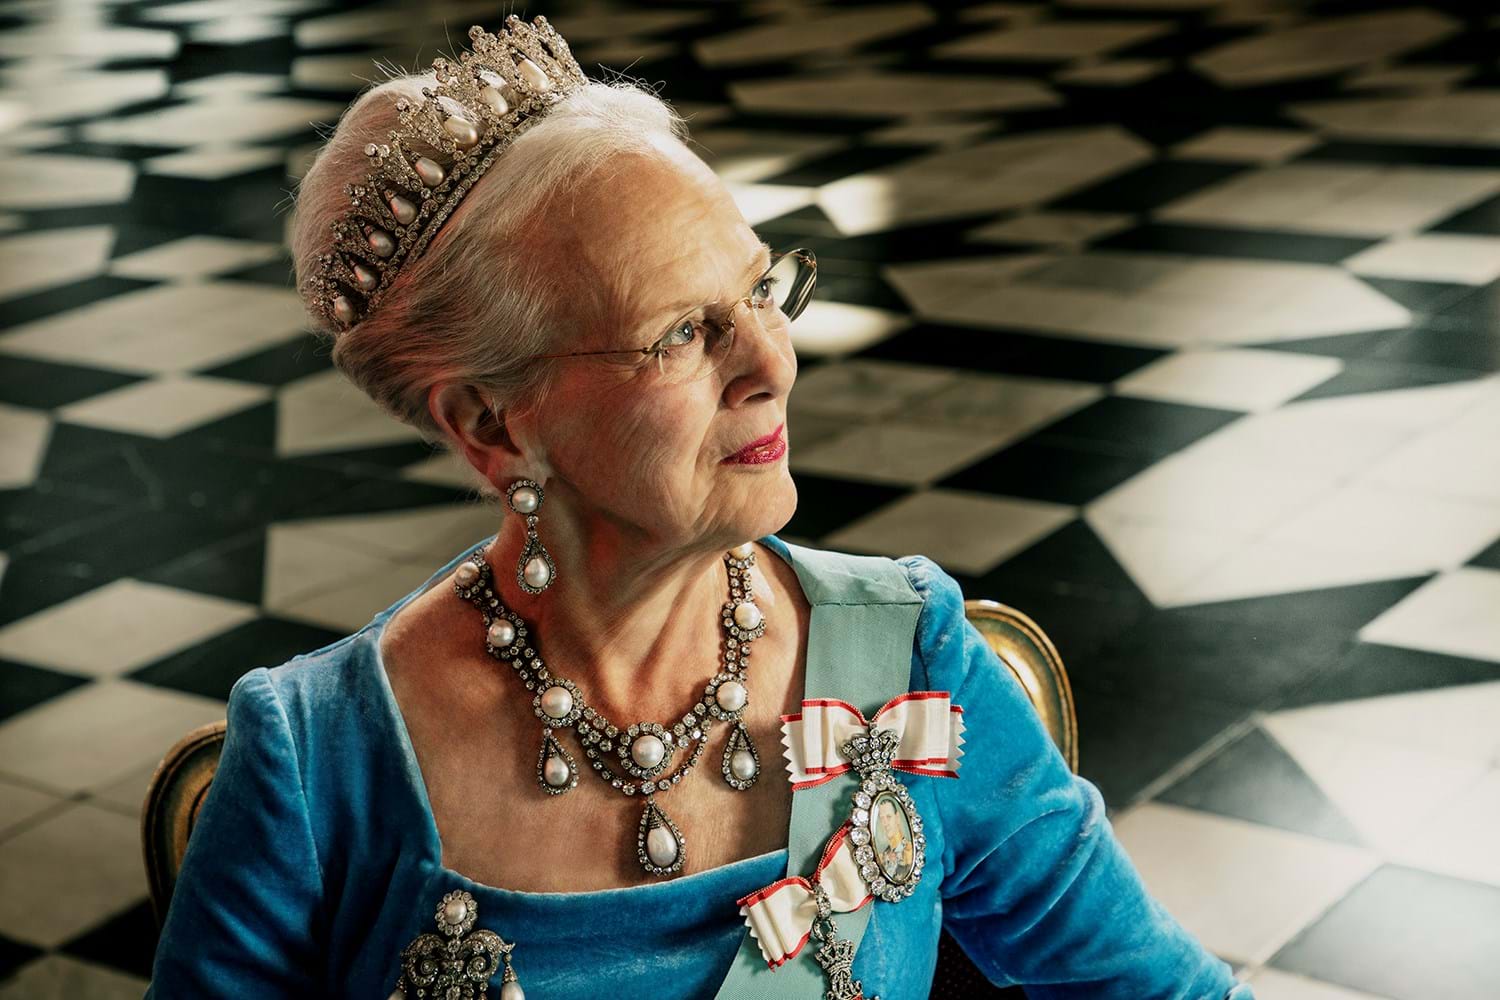 åbenbaring boykot Fristelse The 50th anniversary of HM Queen Margrethe ll's accession to the throne